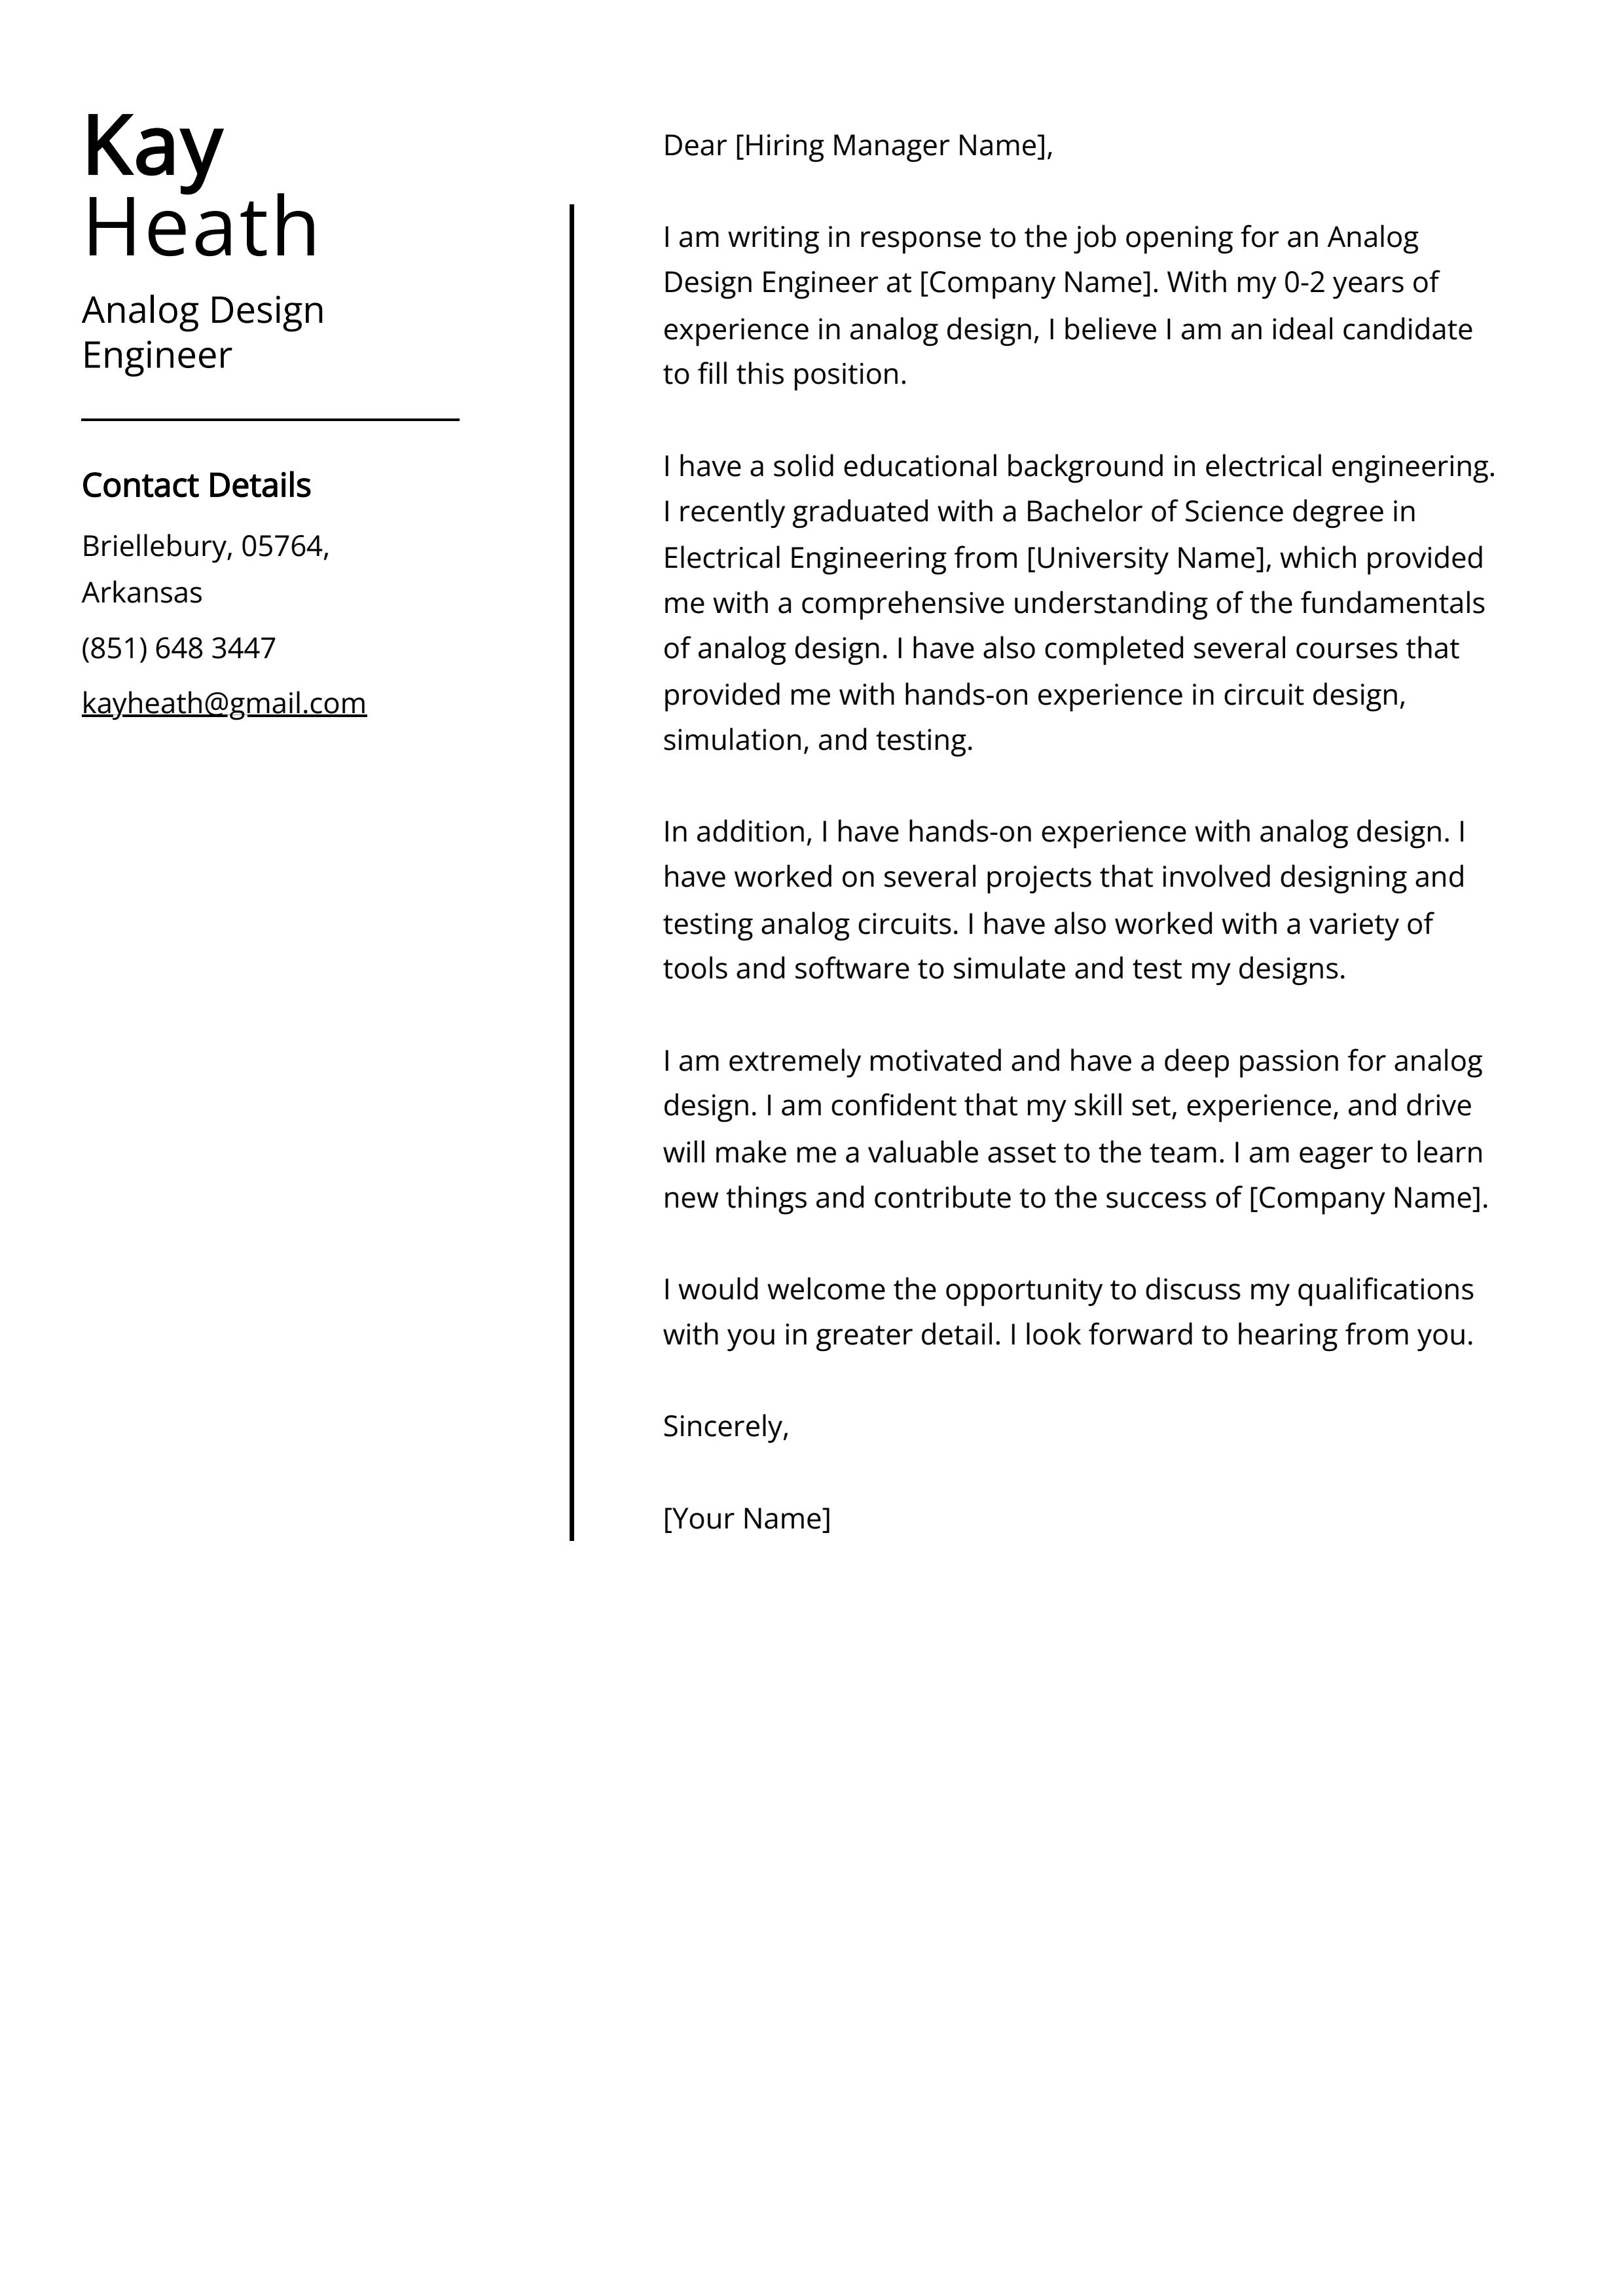 Analog Design Engineer Cover Letter Example